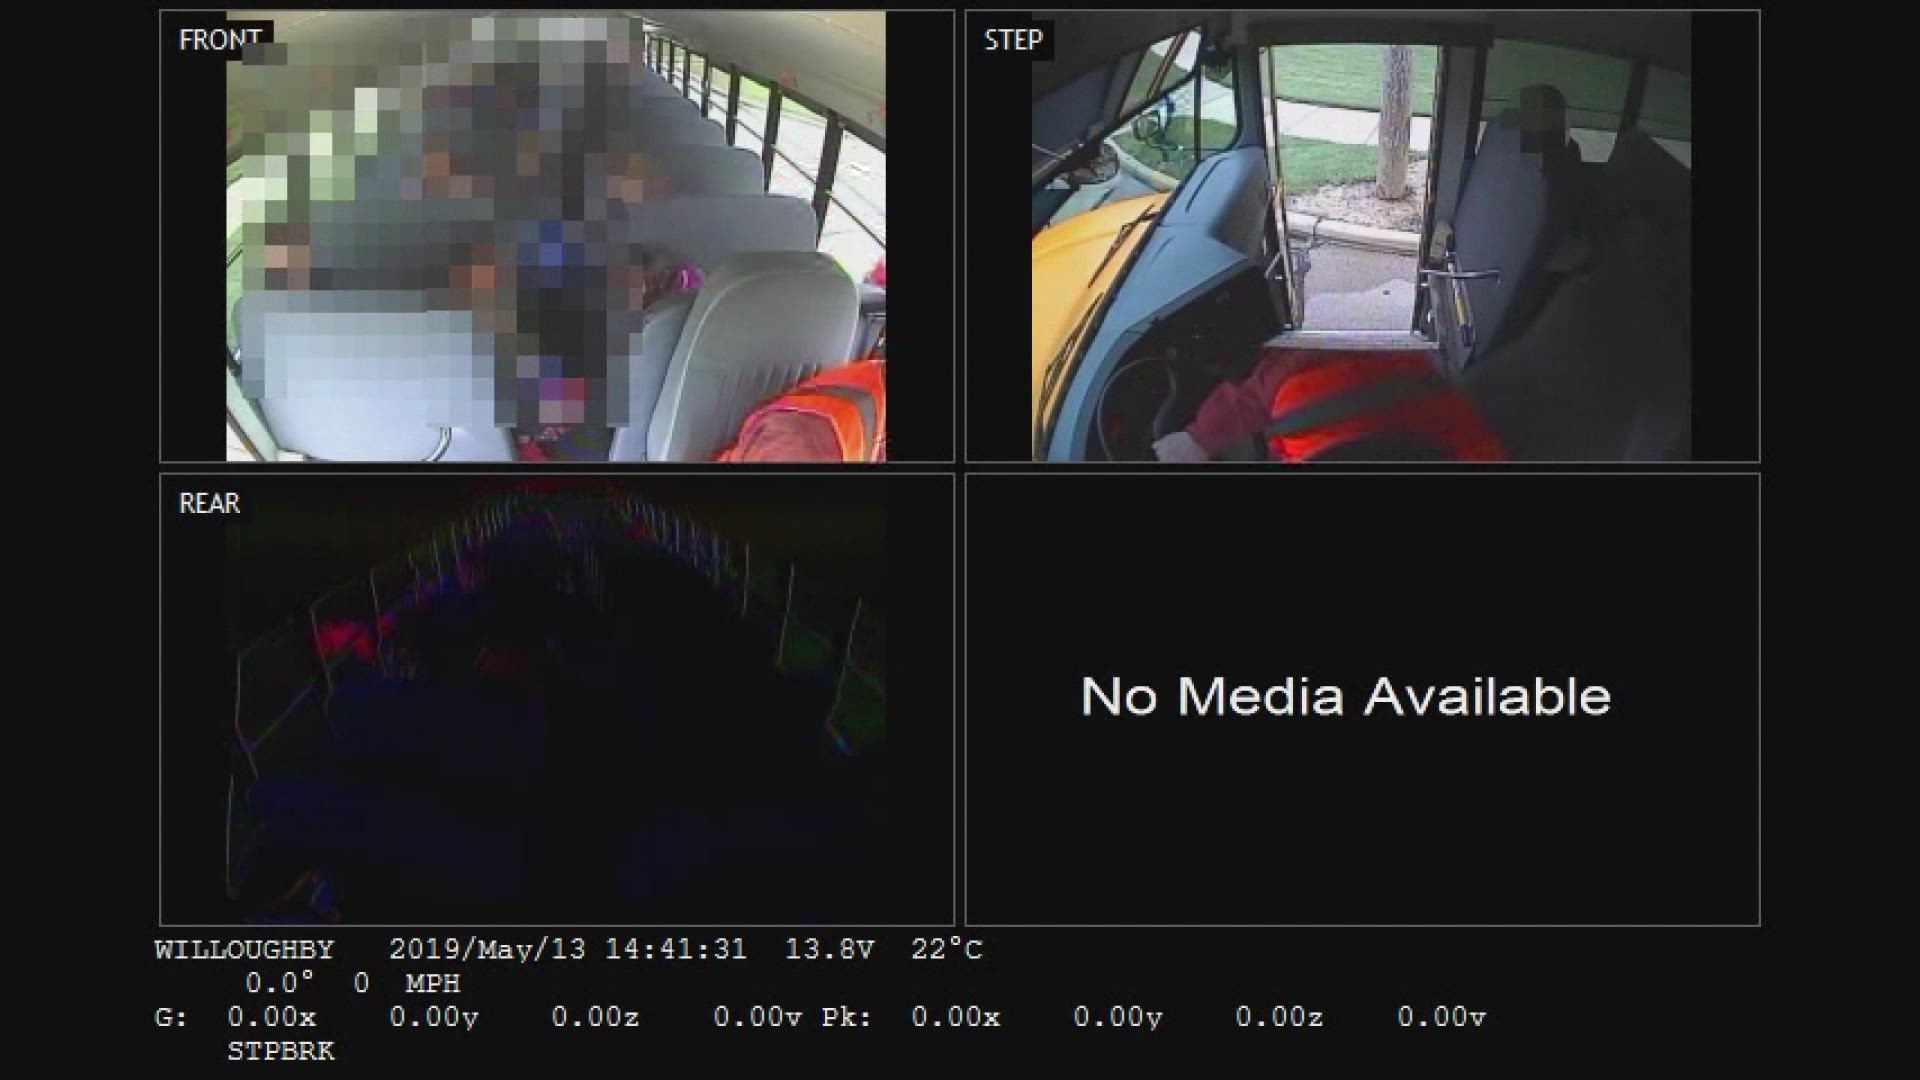 Bus surveillance video shows the moment a car refuses to stop for students crossing a Willowick street. Two students were hit but not seriously injured.